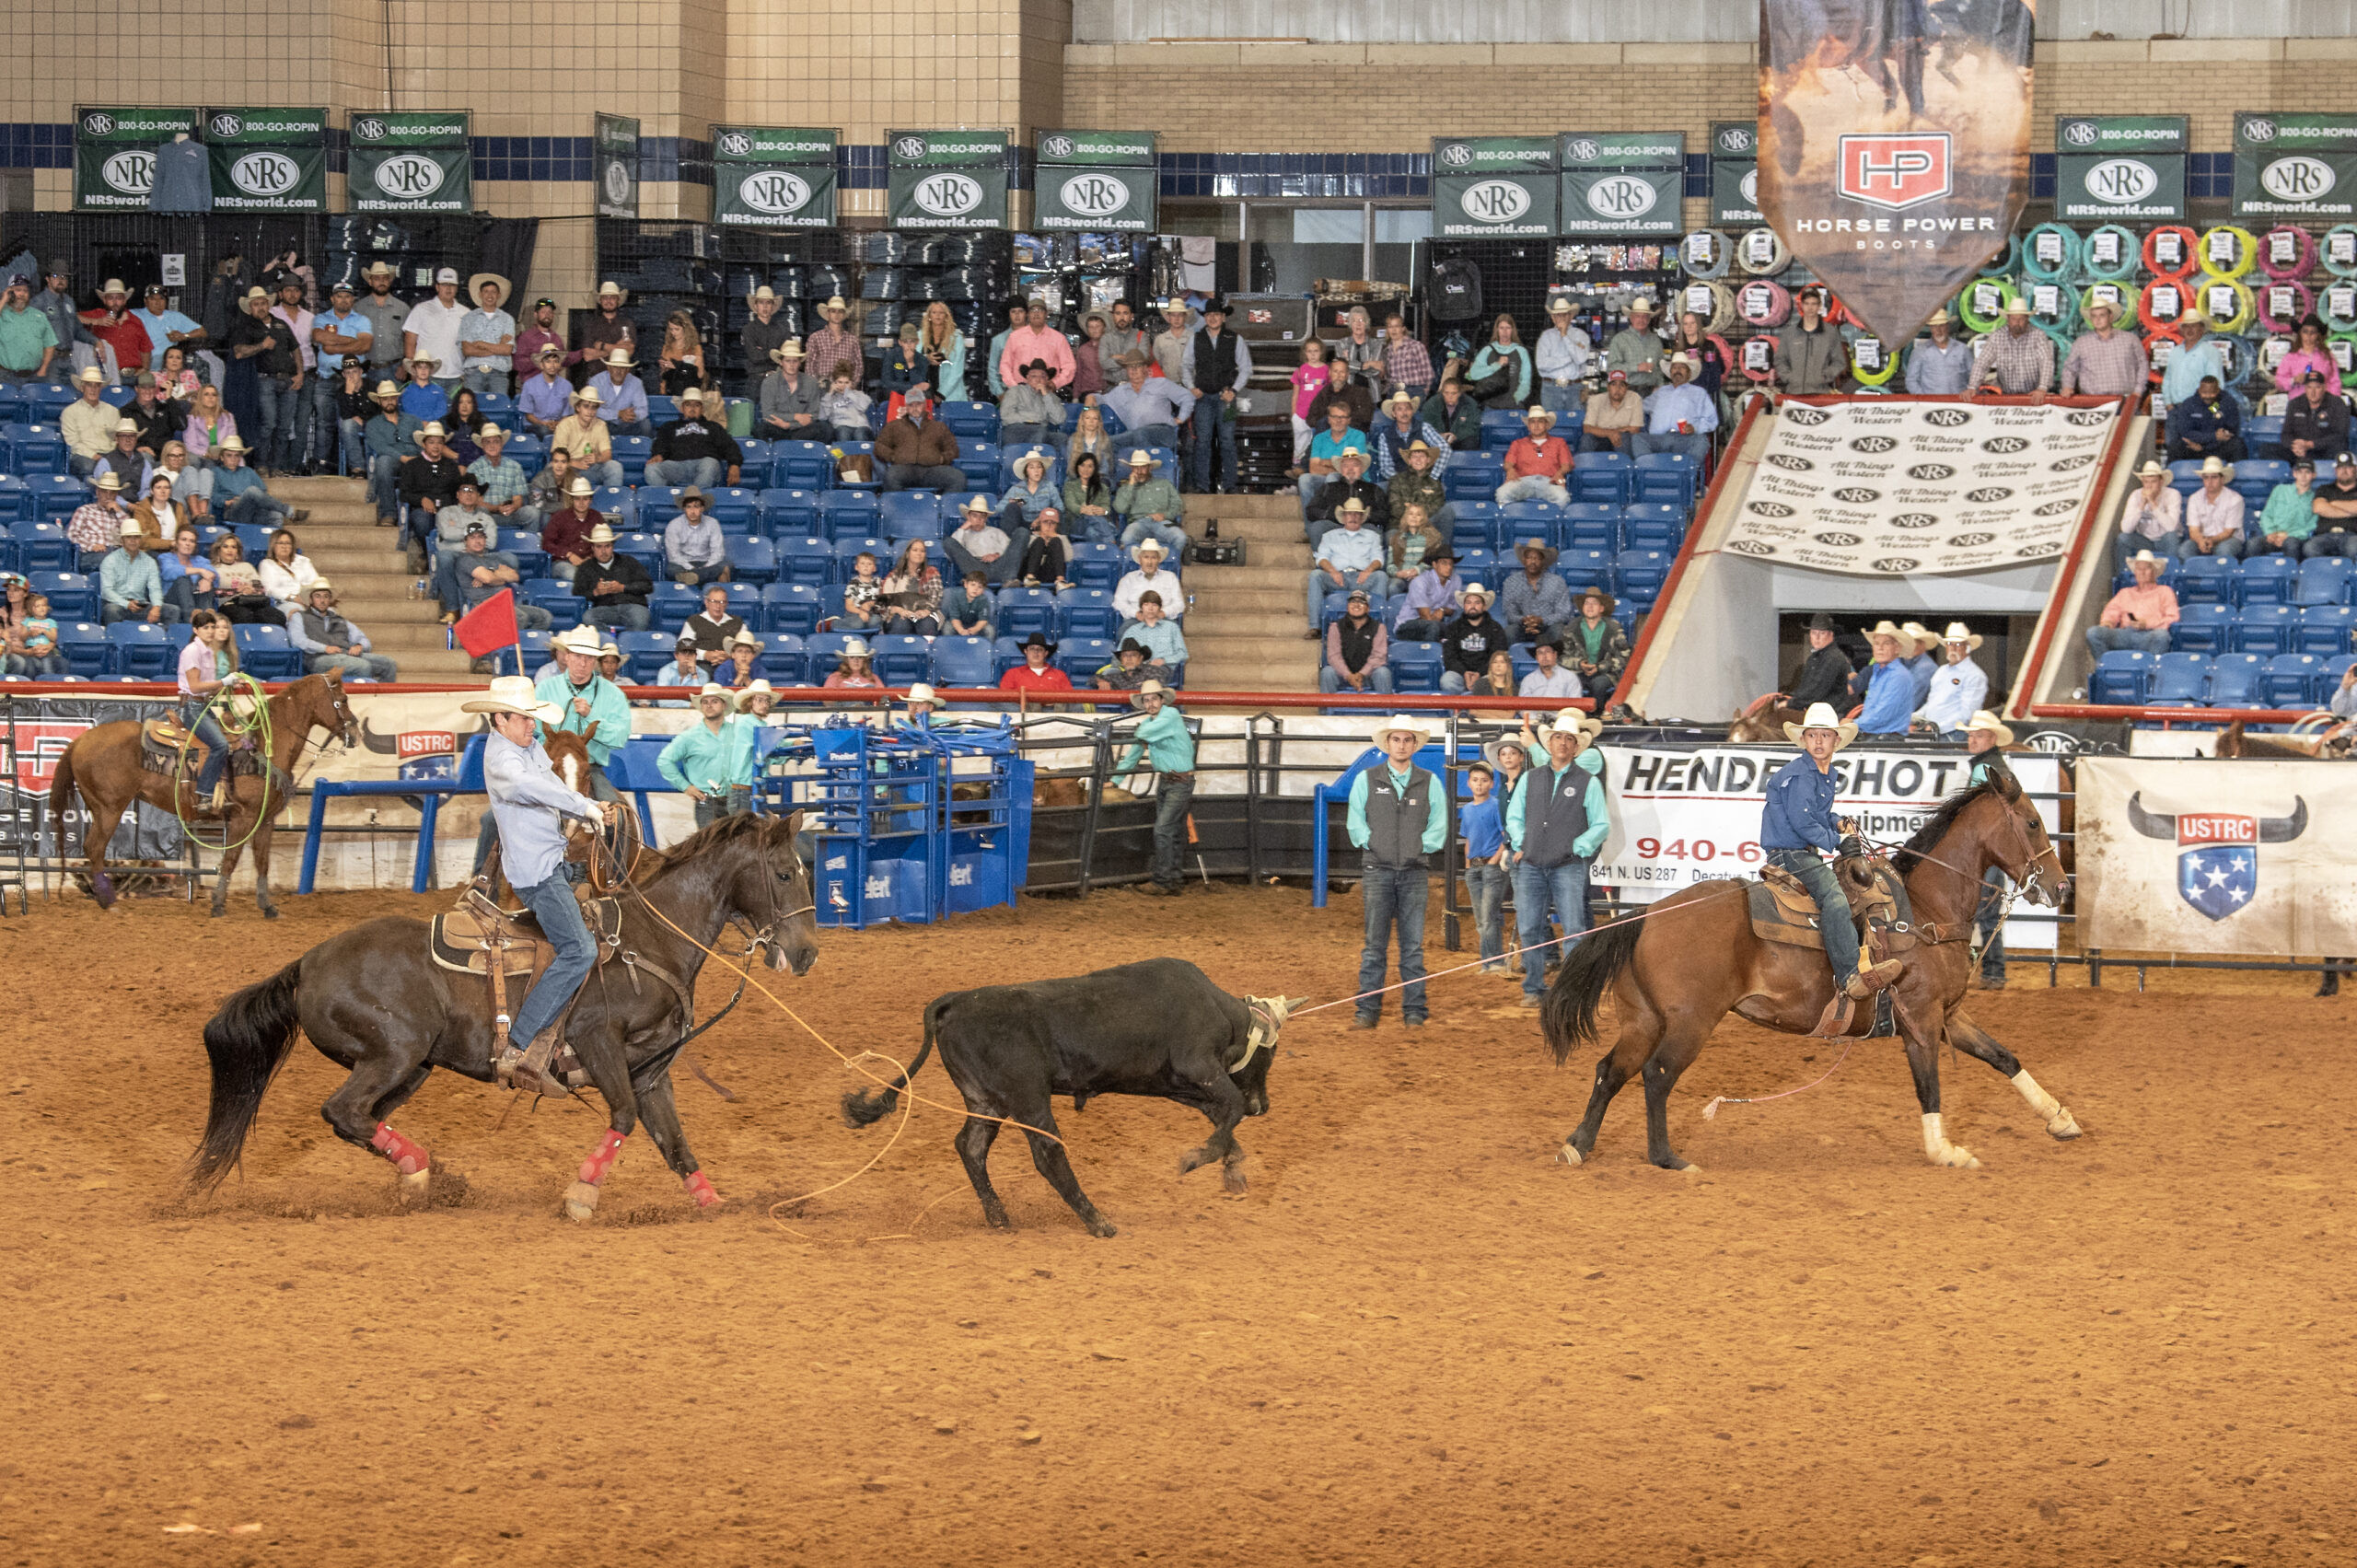 Lawley’s 9.5 Shootout champs, 14-year-old Rhyder Rosipal and 15-year-old Kolter Jackson, roping their steer.